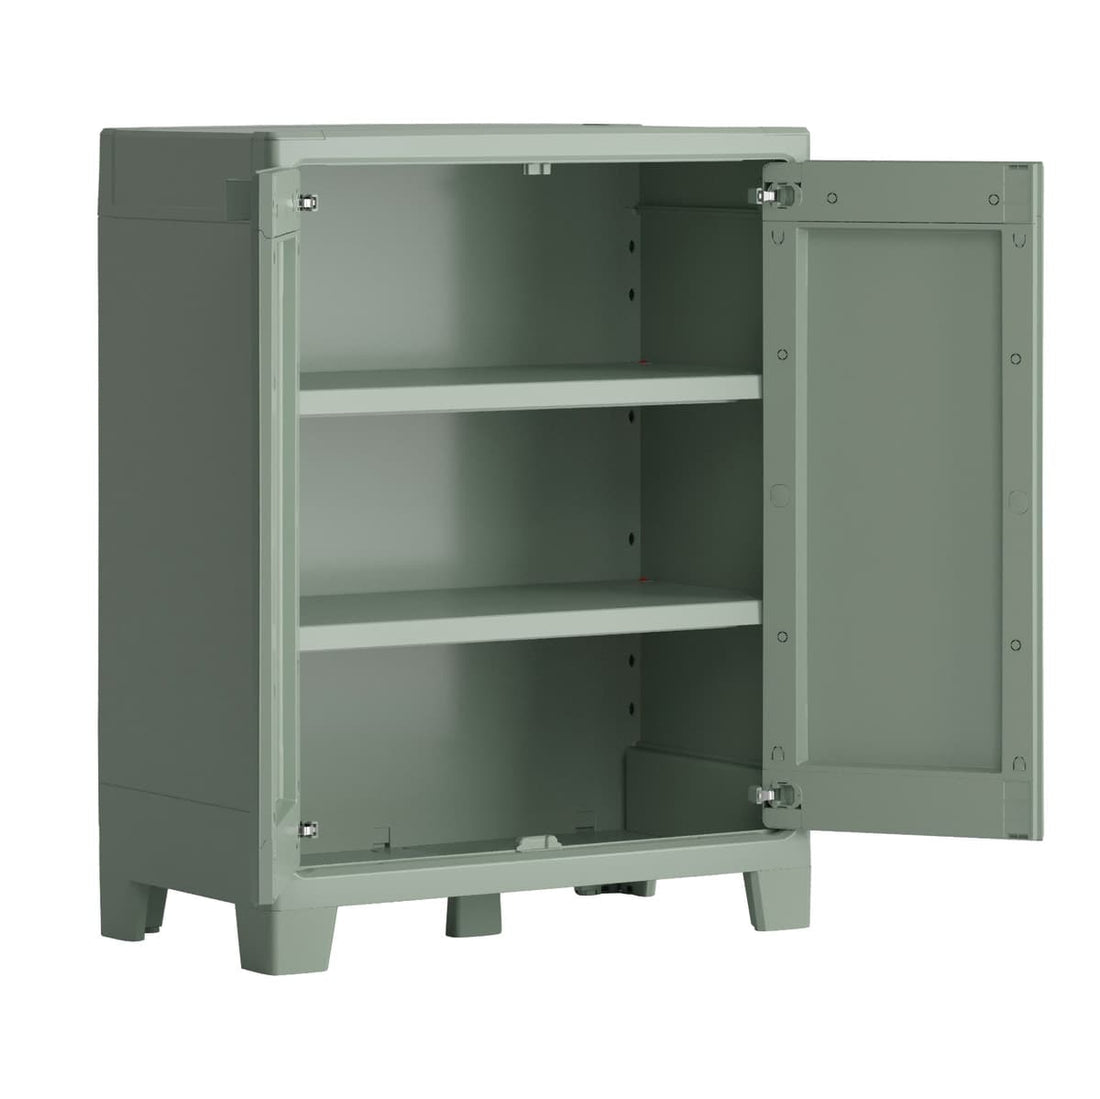 LOW PLANET CABINET 80x44x100h 2 ADJUSTABLE RACKS RECYCLED MATERIAL - best price from Maltashopper.com BR440002955